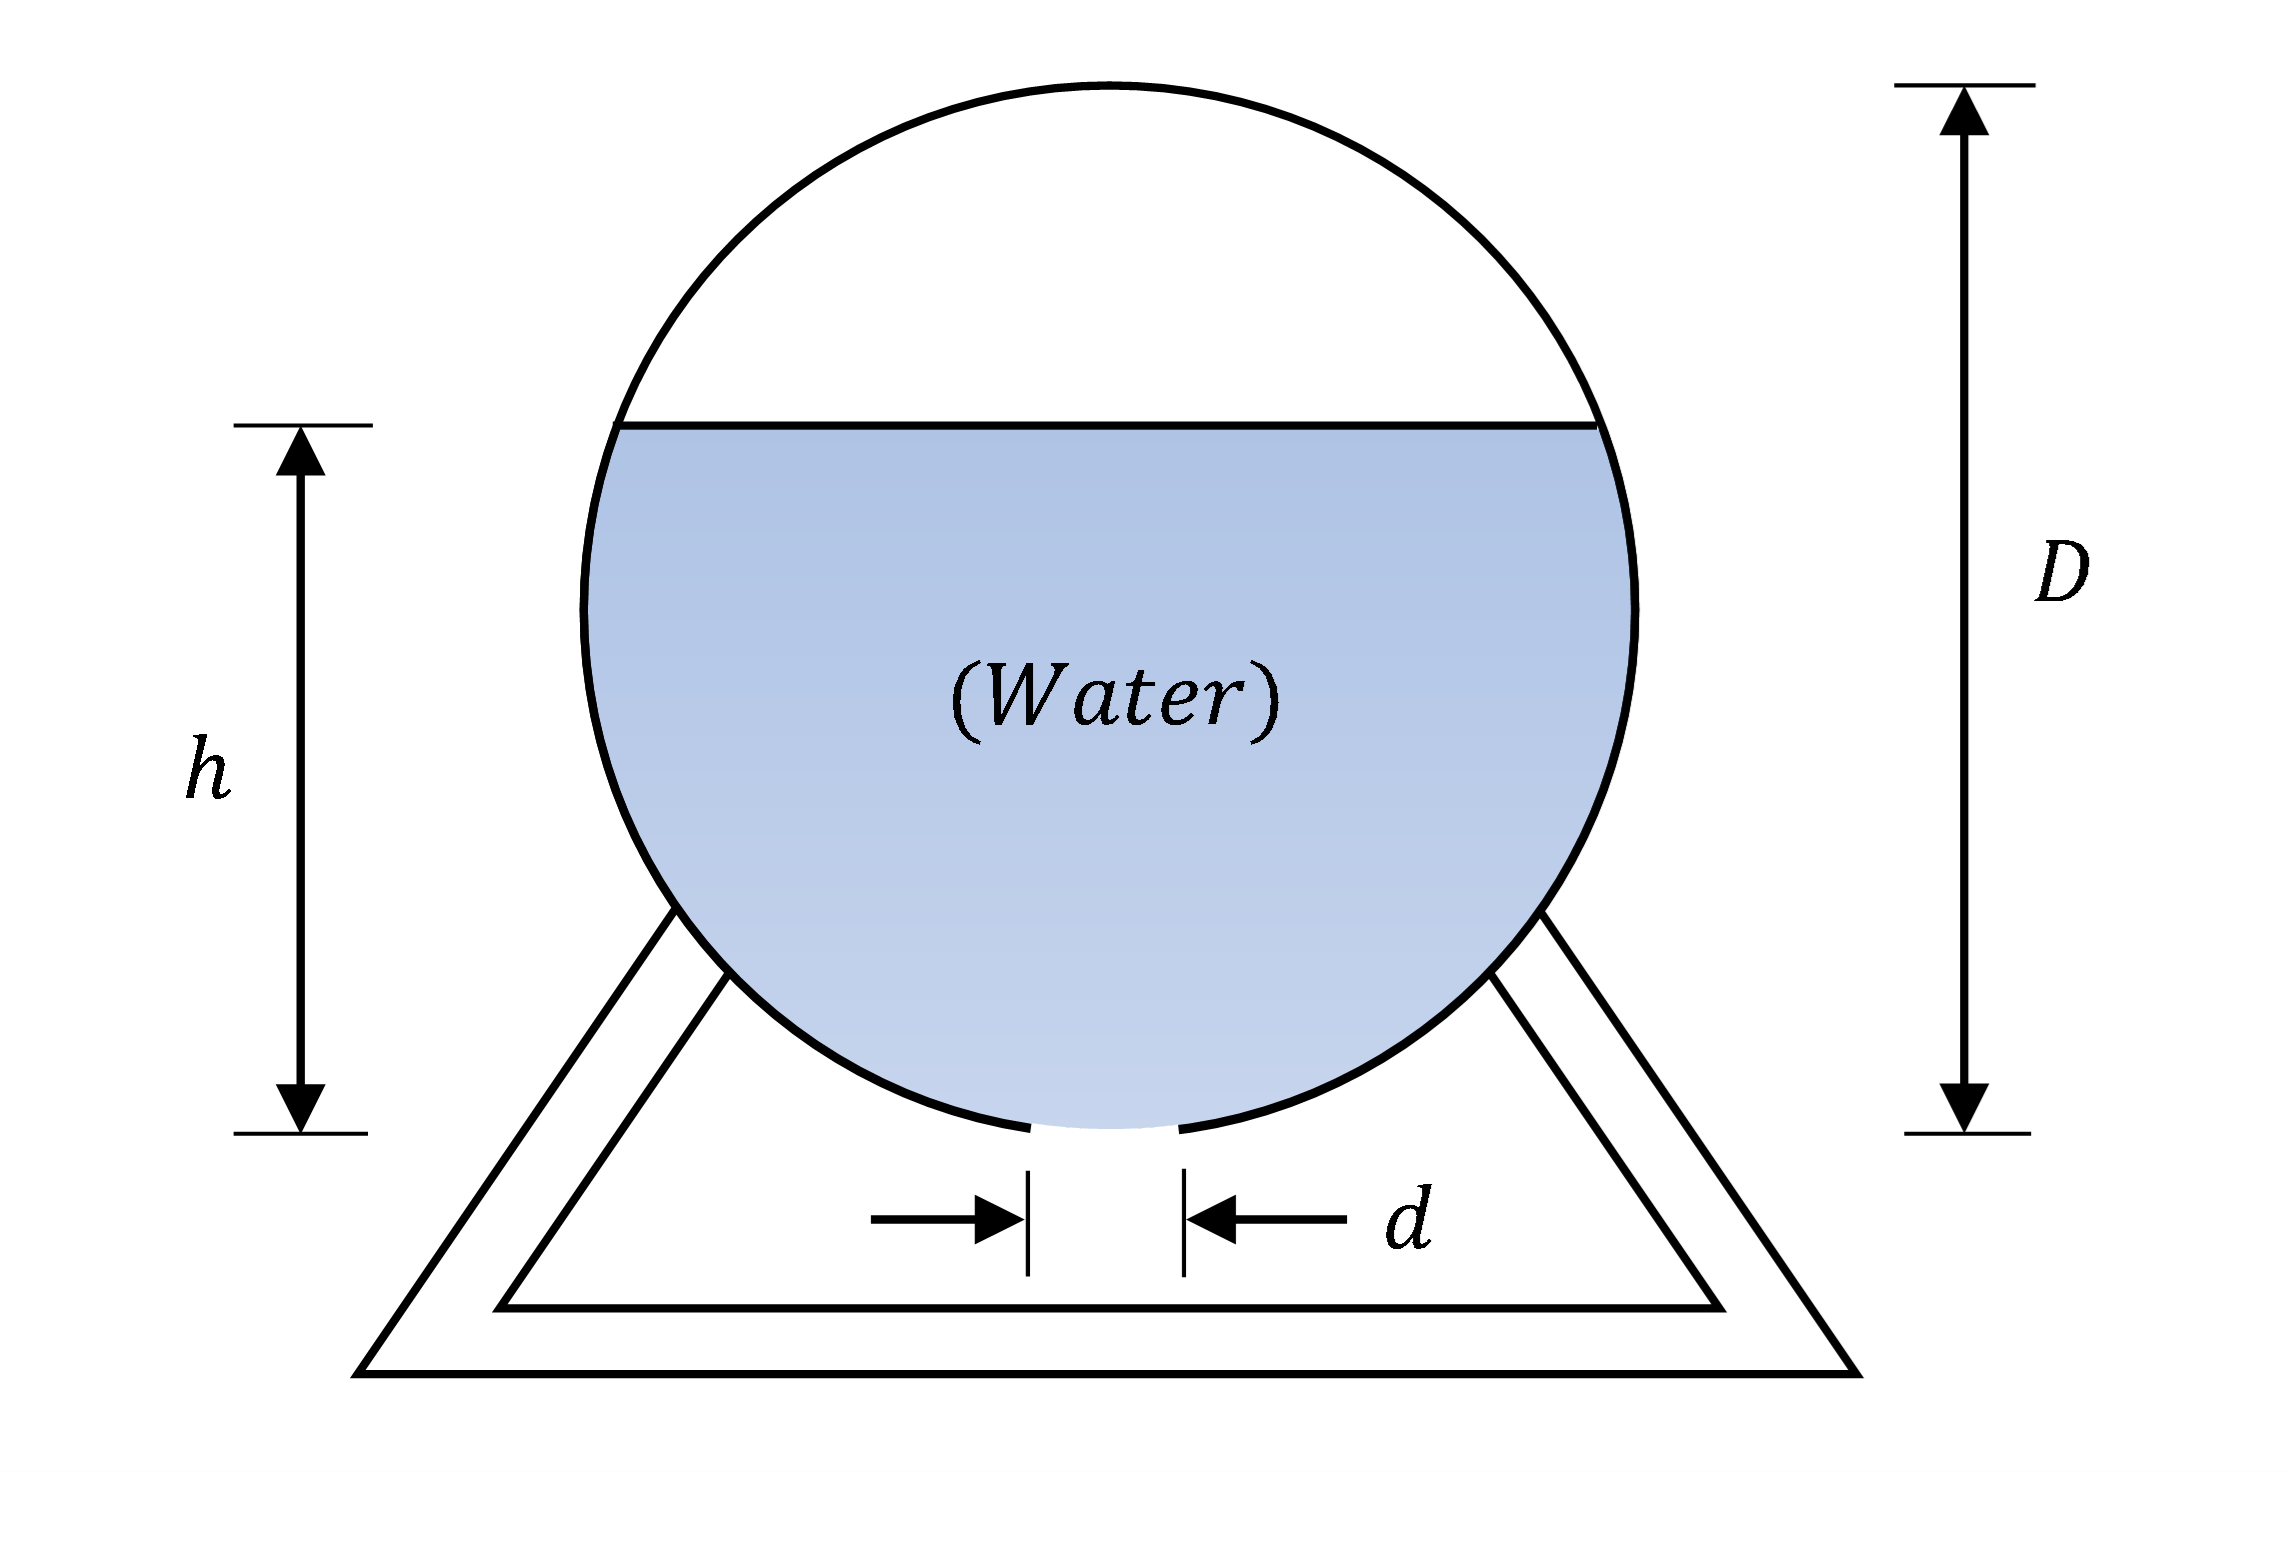 A spherical tank of diameter capital-D is filled with water up to a height h above the bottom of the tank. The bottom of the tank has a circular hole of diameter lowercase-d.